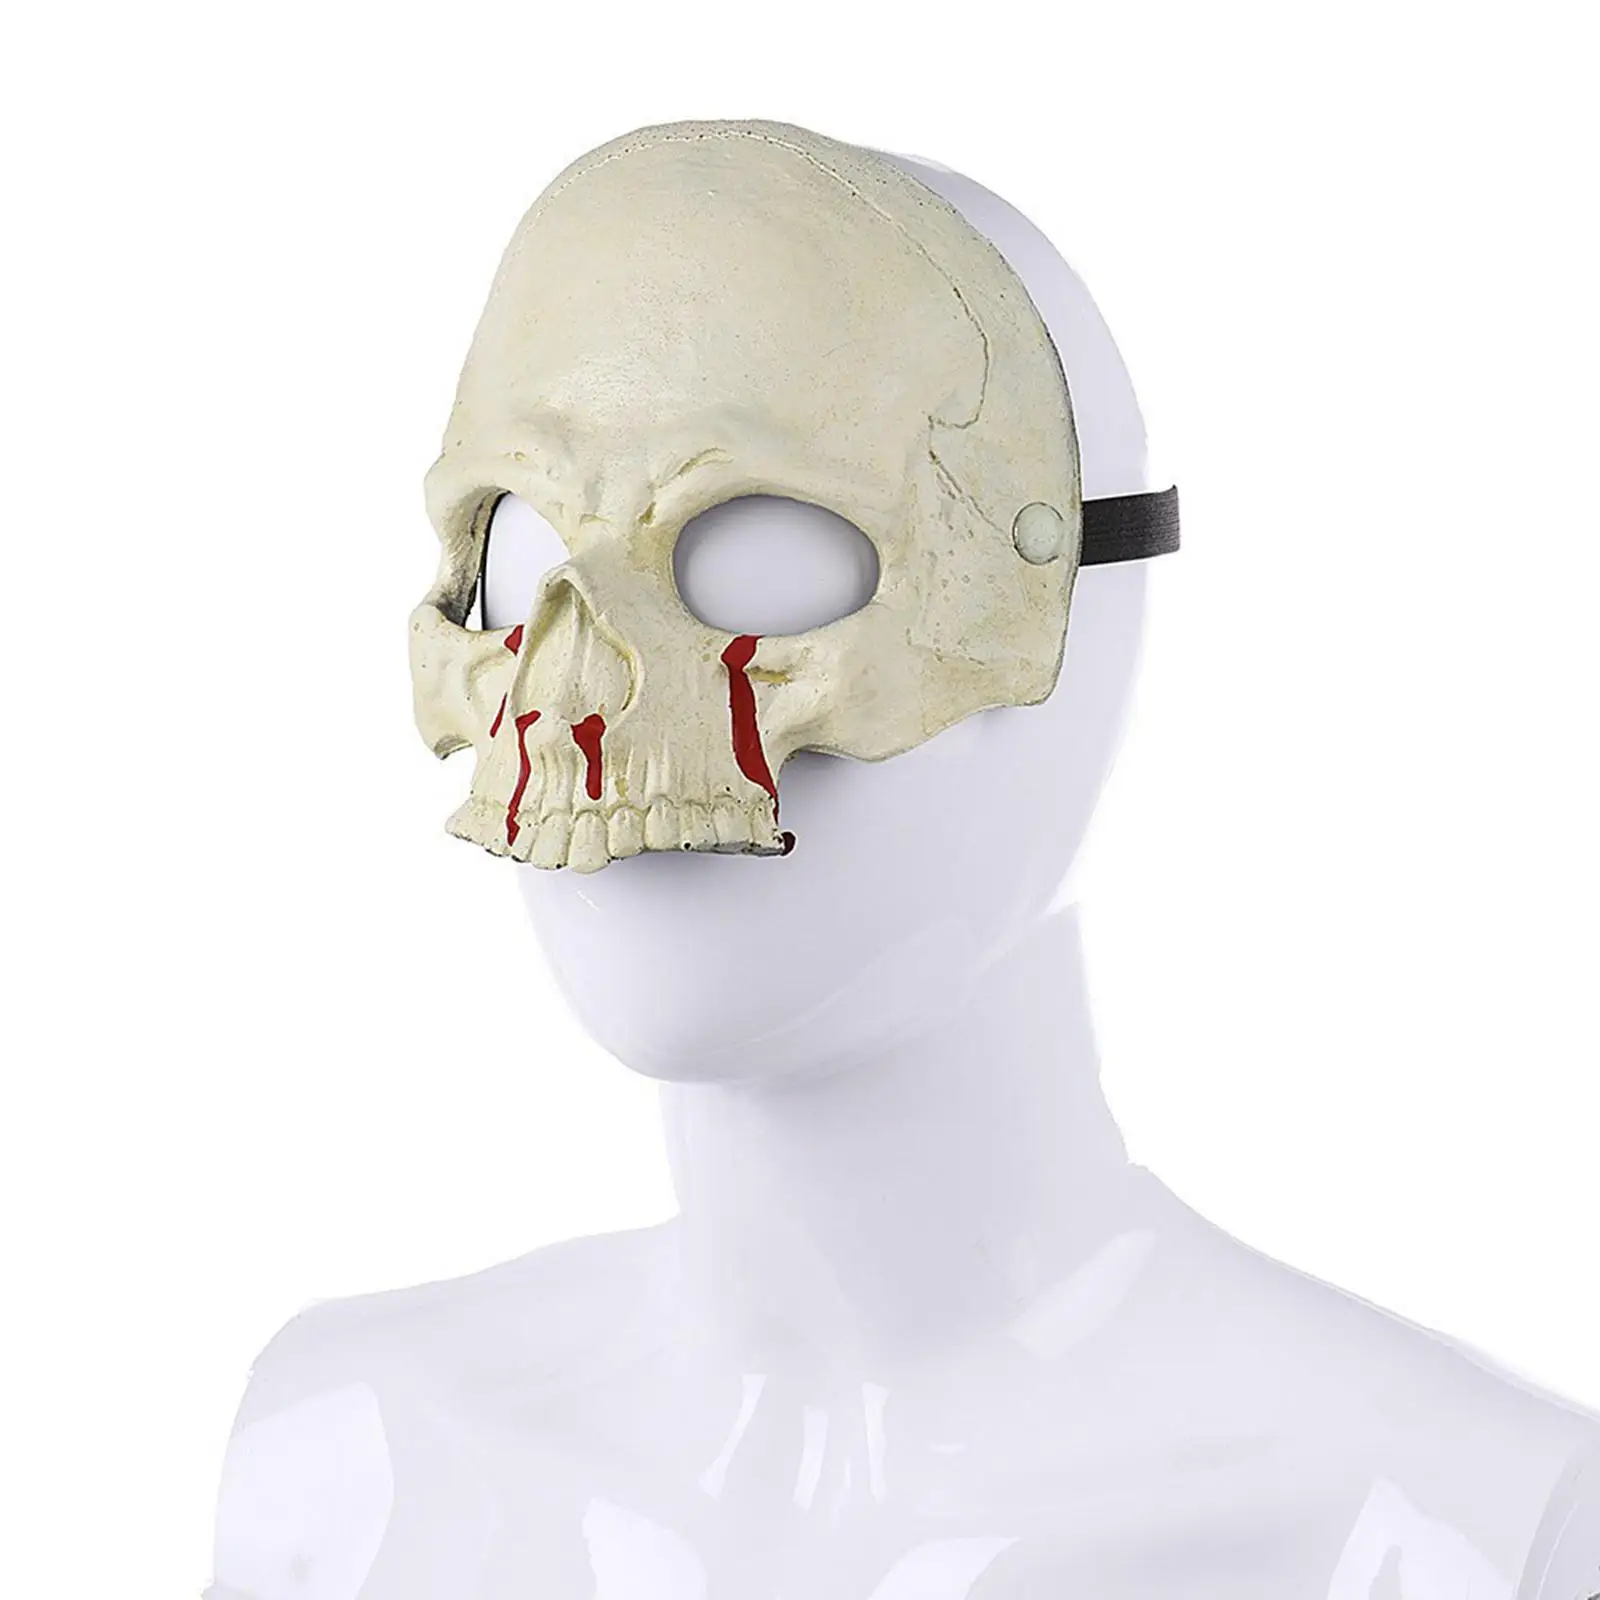 Halloween Skull Mask Decoration Eyemask Scary Half Face Mask for Adults Masquerade Stage Performance Dress up Pretend Play